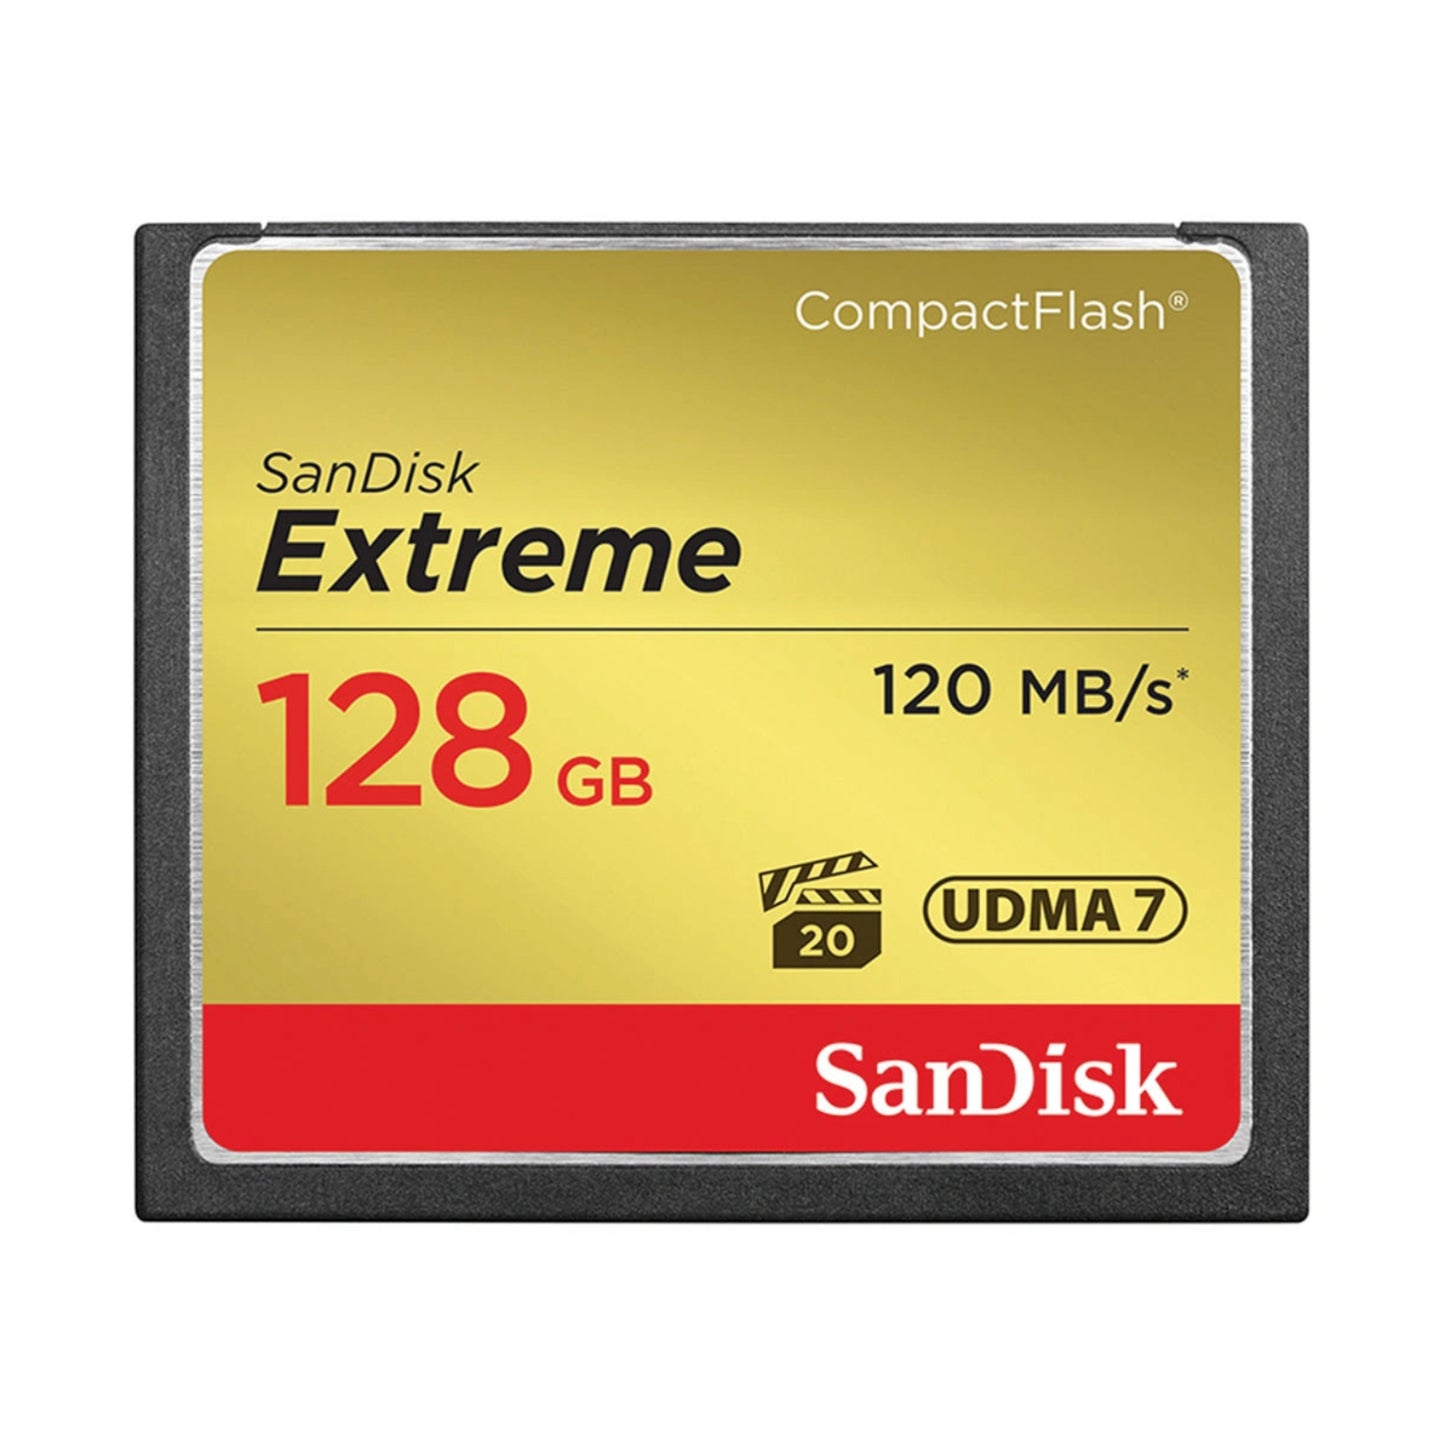 SanDisk 128GB Compact Flash Memory Card